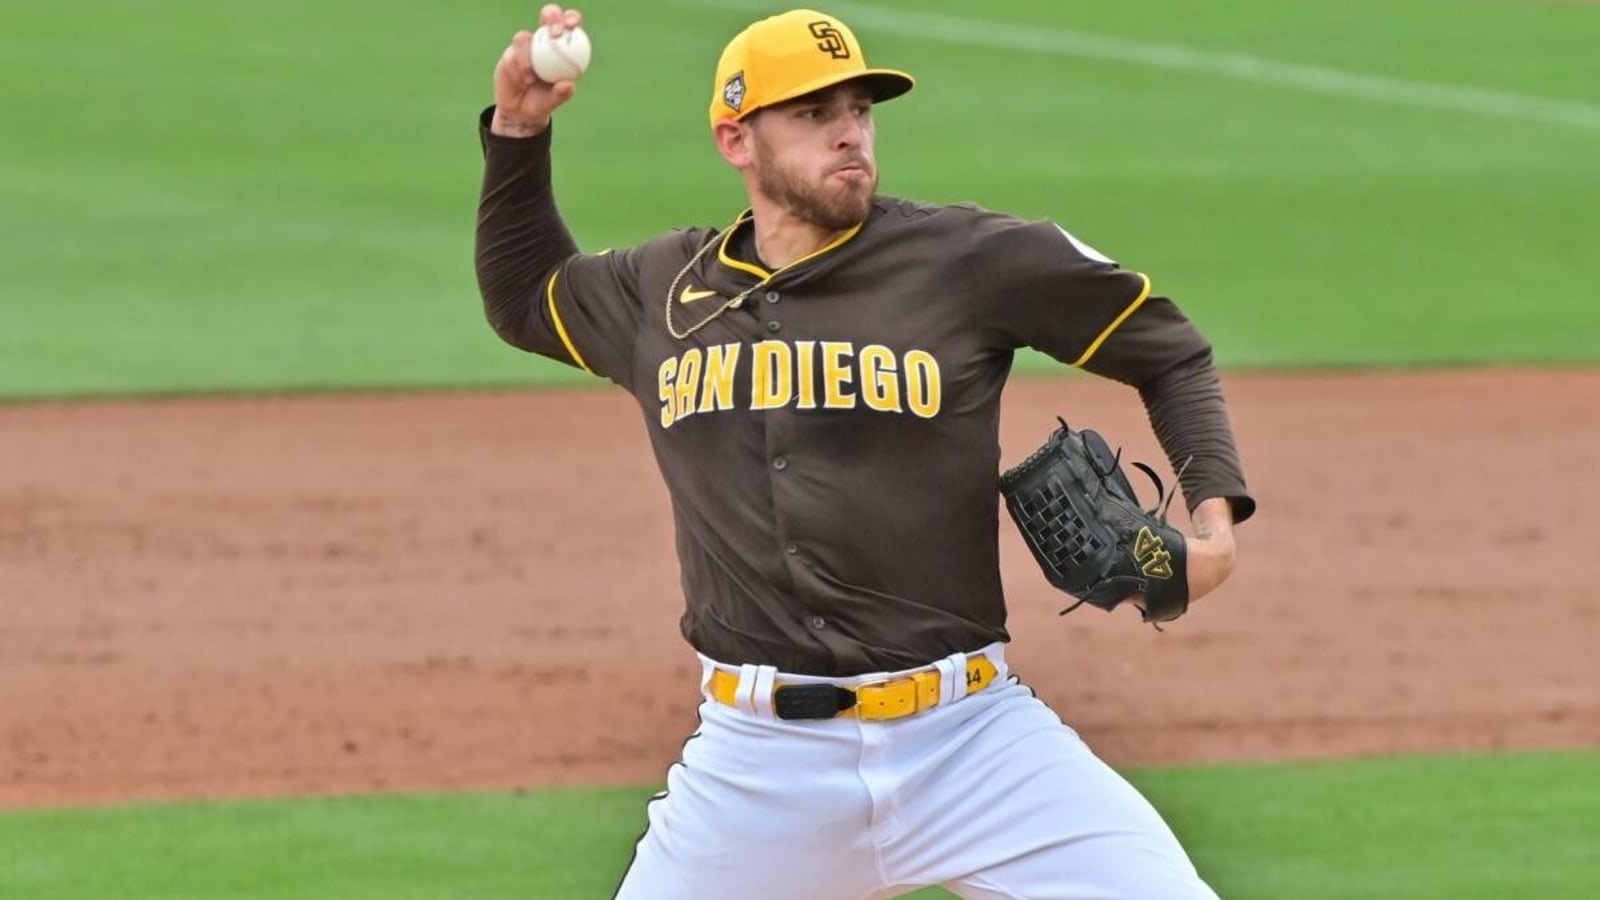 Joe Musgrove Feeling More Confident Heading Into Next Start After Rough First Two Outings